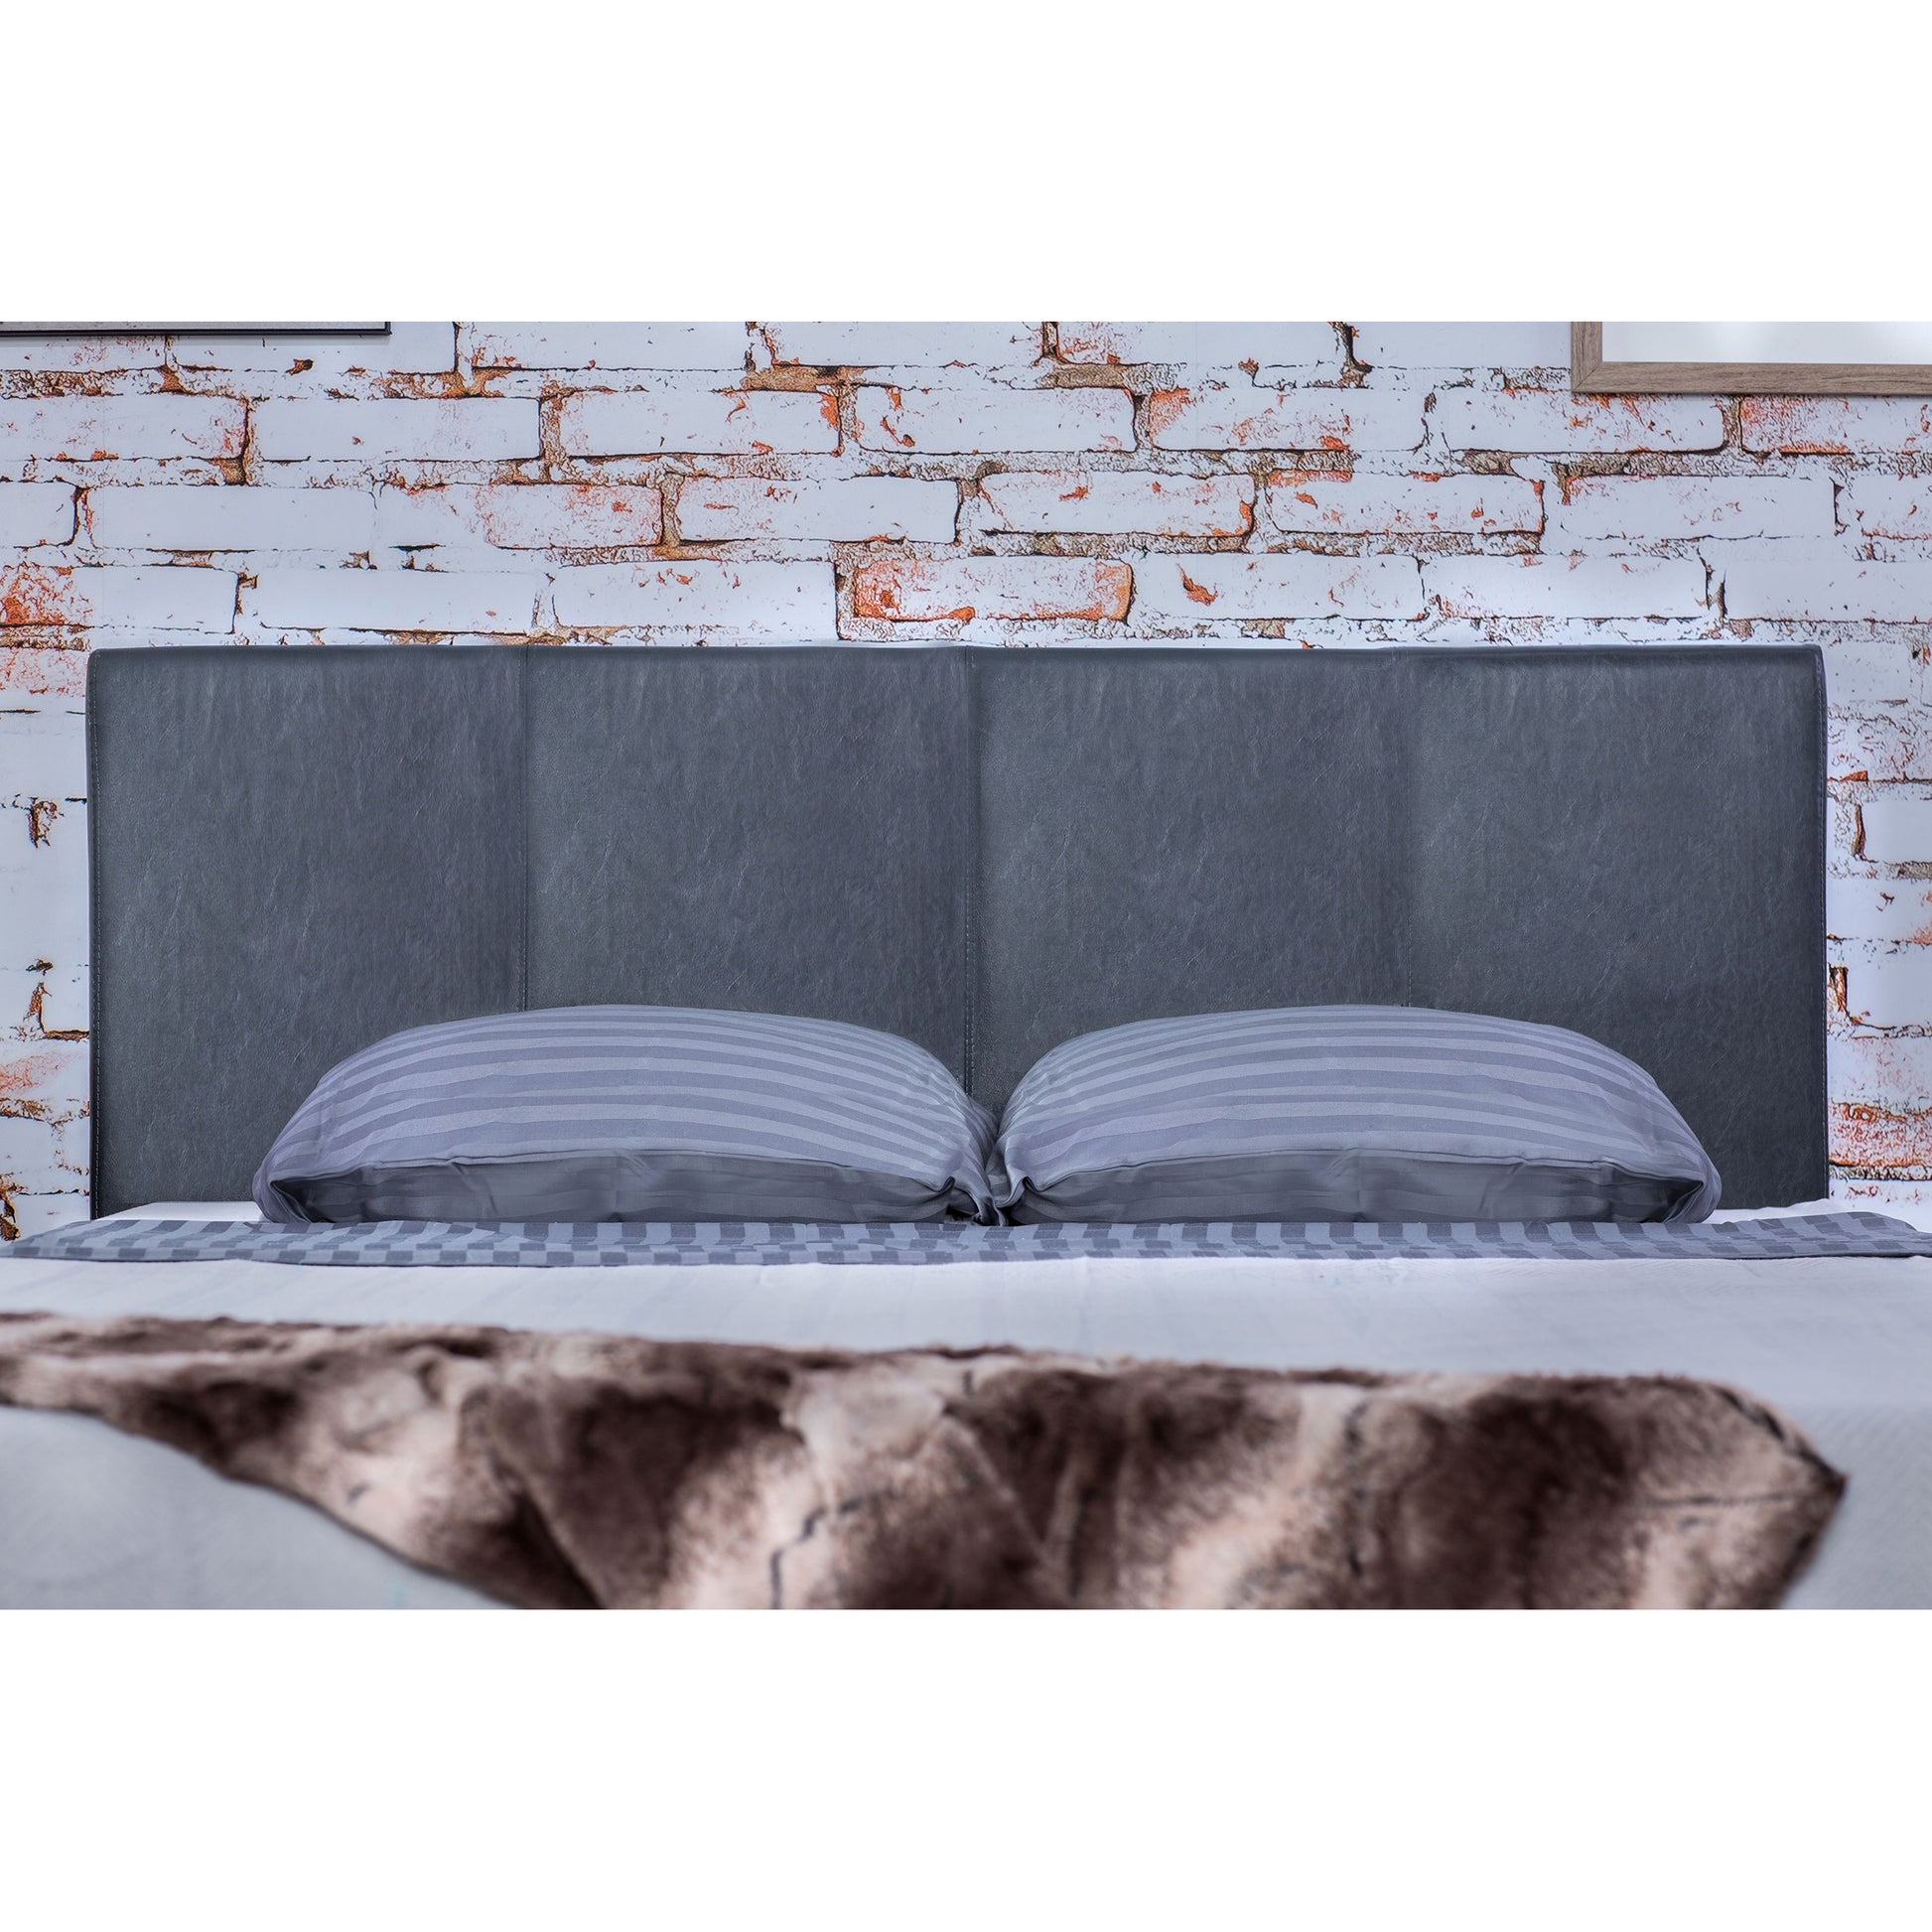 Front-facing headboard focus on a contemporary gray faux leather full platform bed in a bedroom with accessories